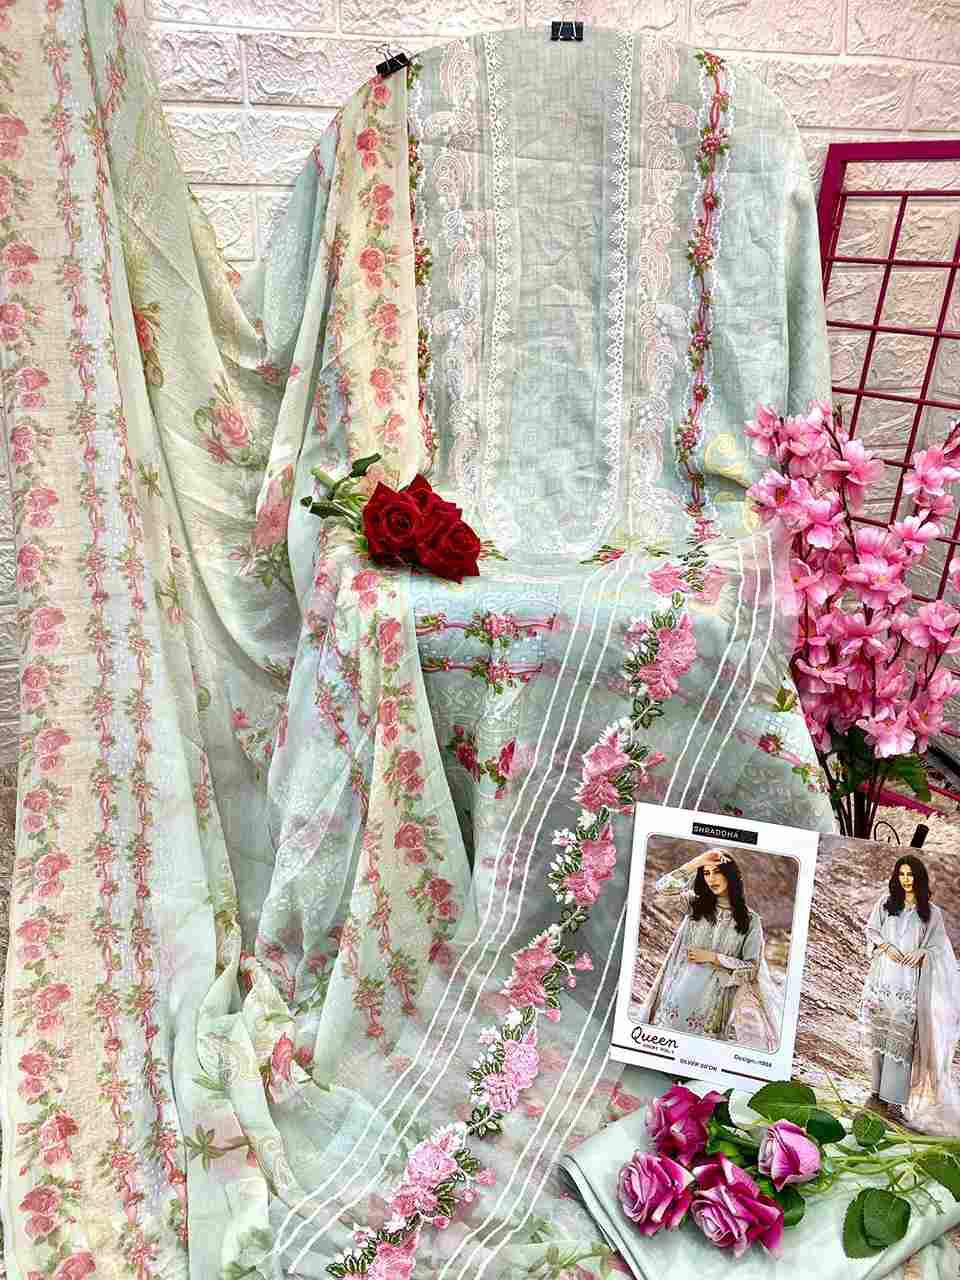 Shraddha Nx Queen Court Vol 1 NX Lawn Cotton With Embroidery Patch Work Chiffon Dupatta pakistani suits in surat - jilaniwholesalesuit